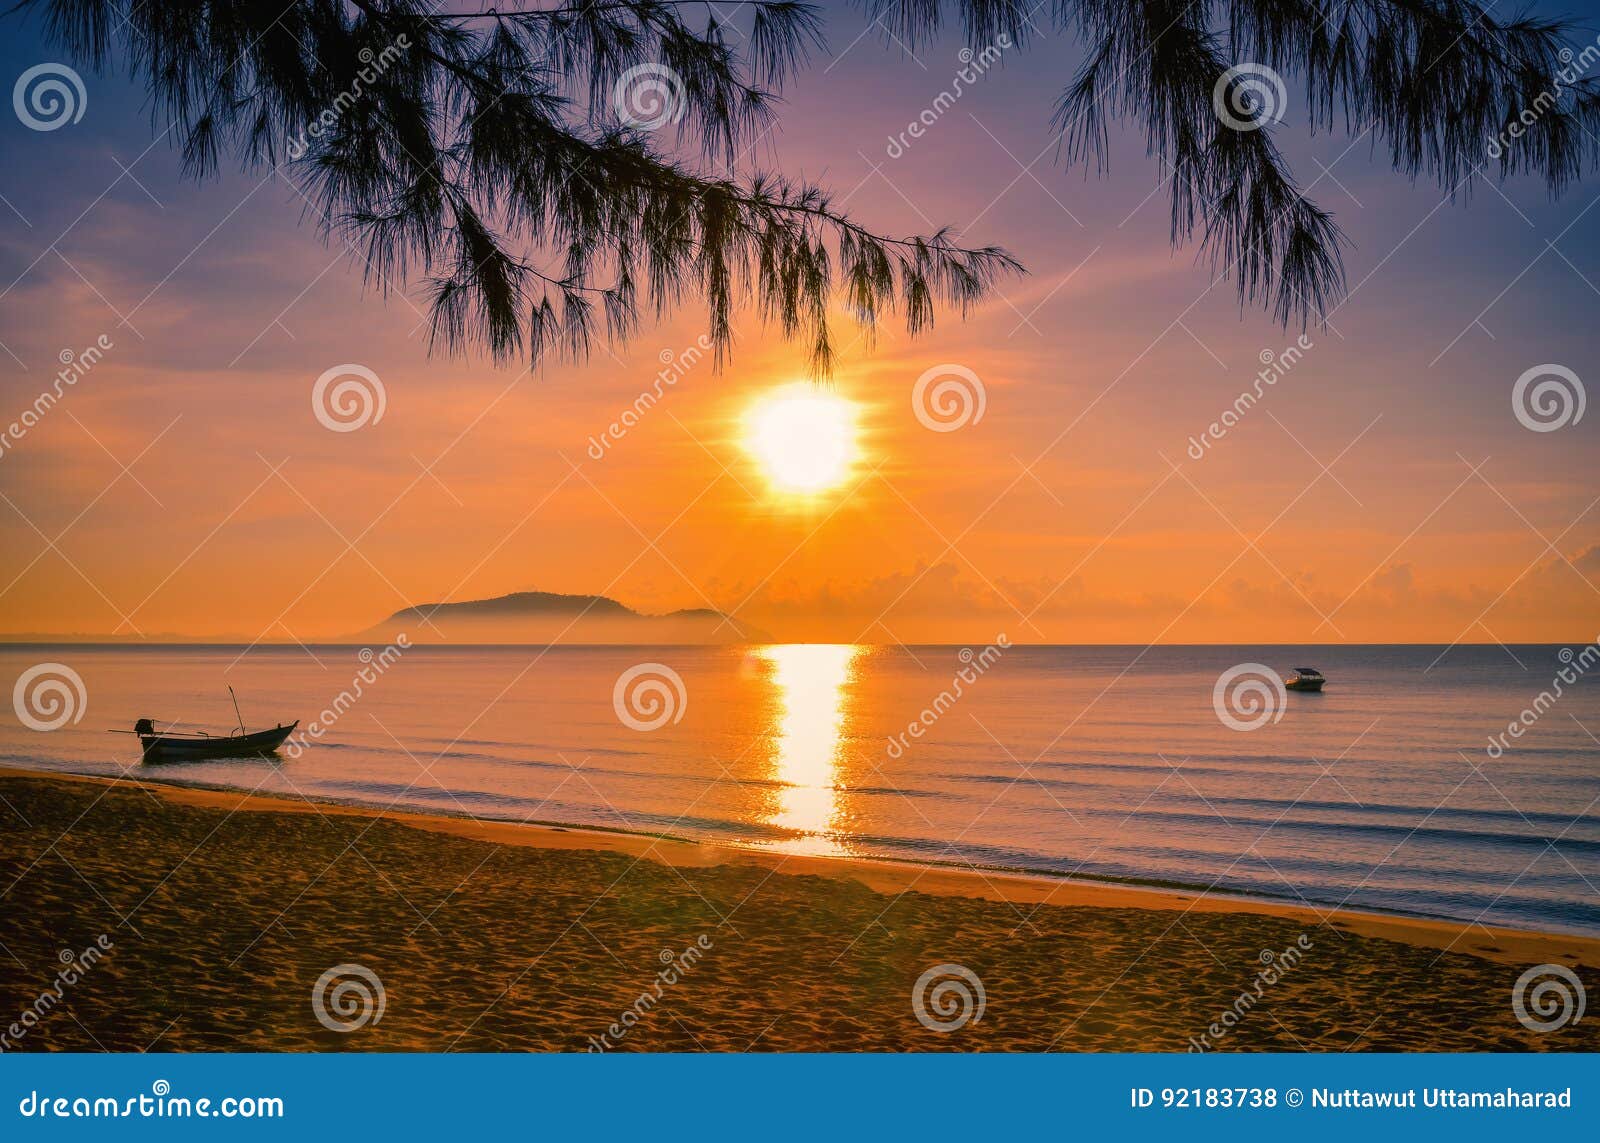 landscapes of sunset on the beach with colorful sky